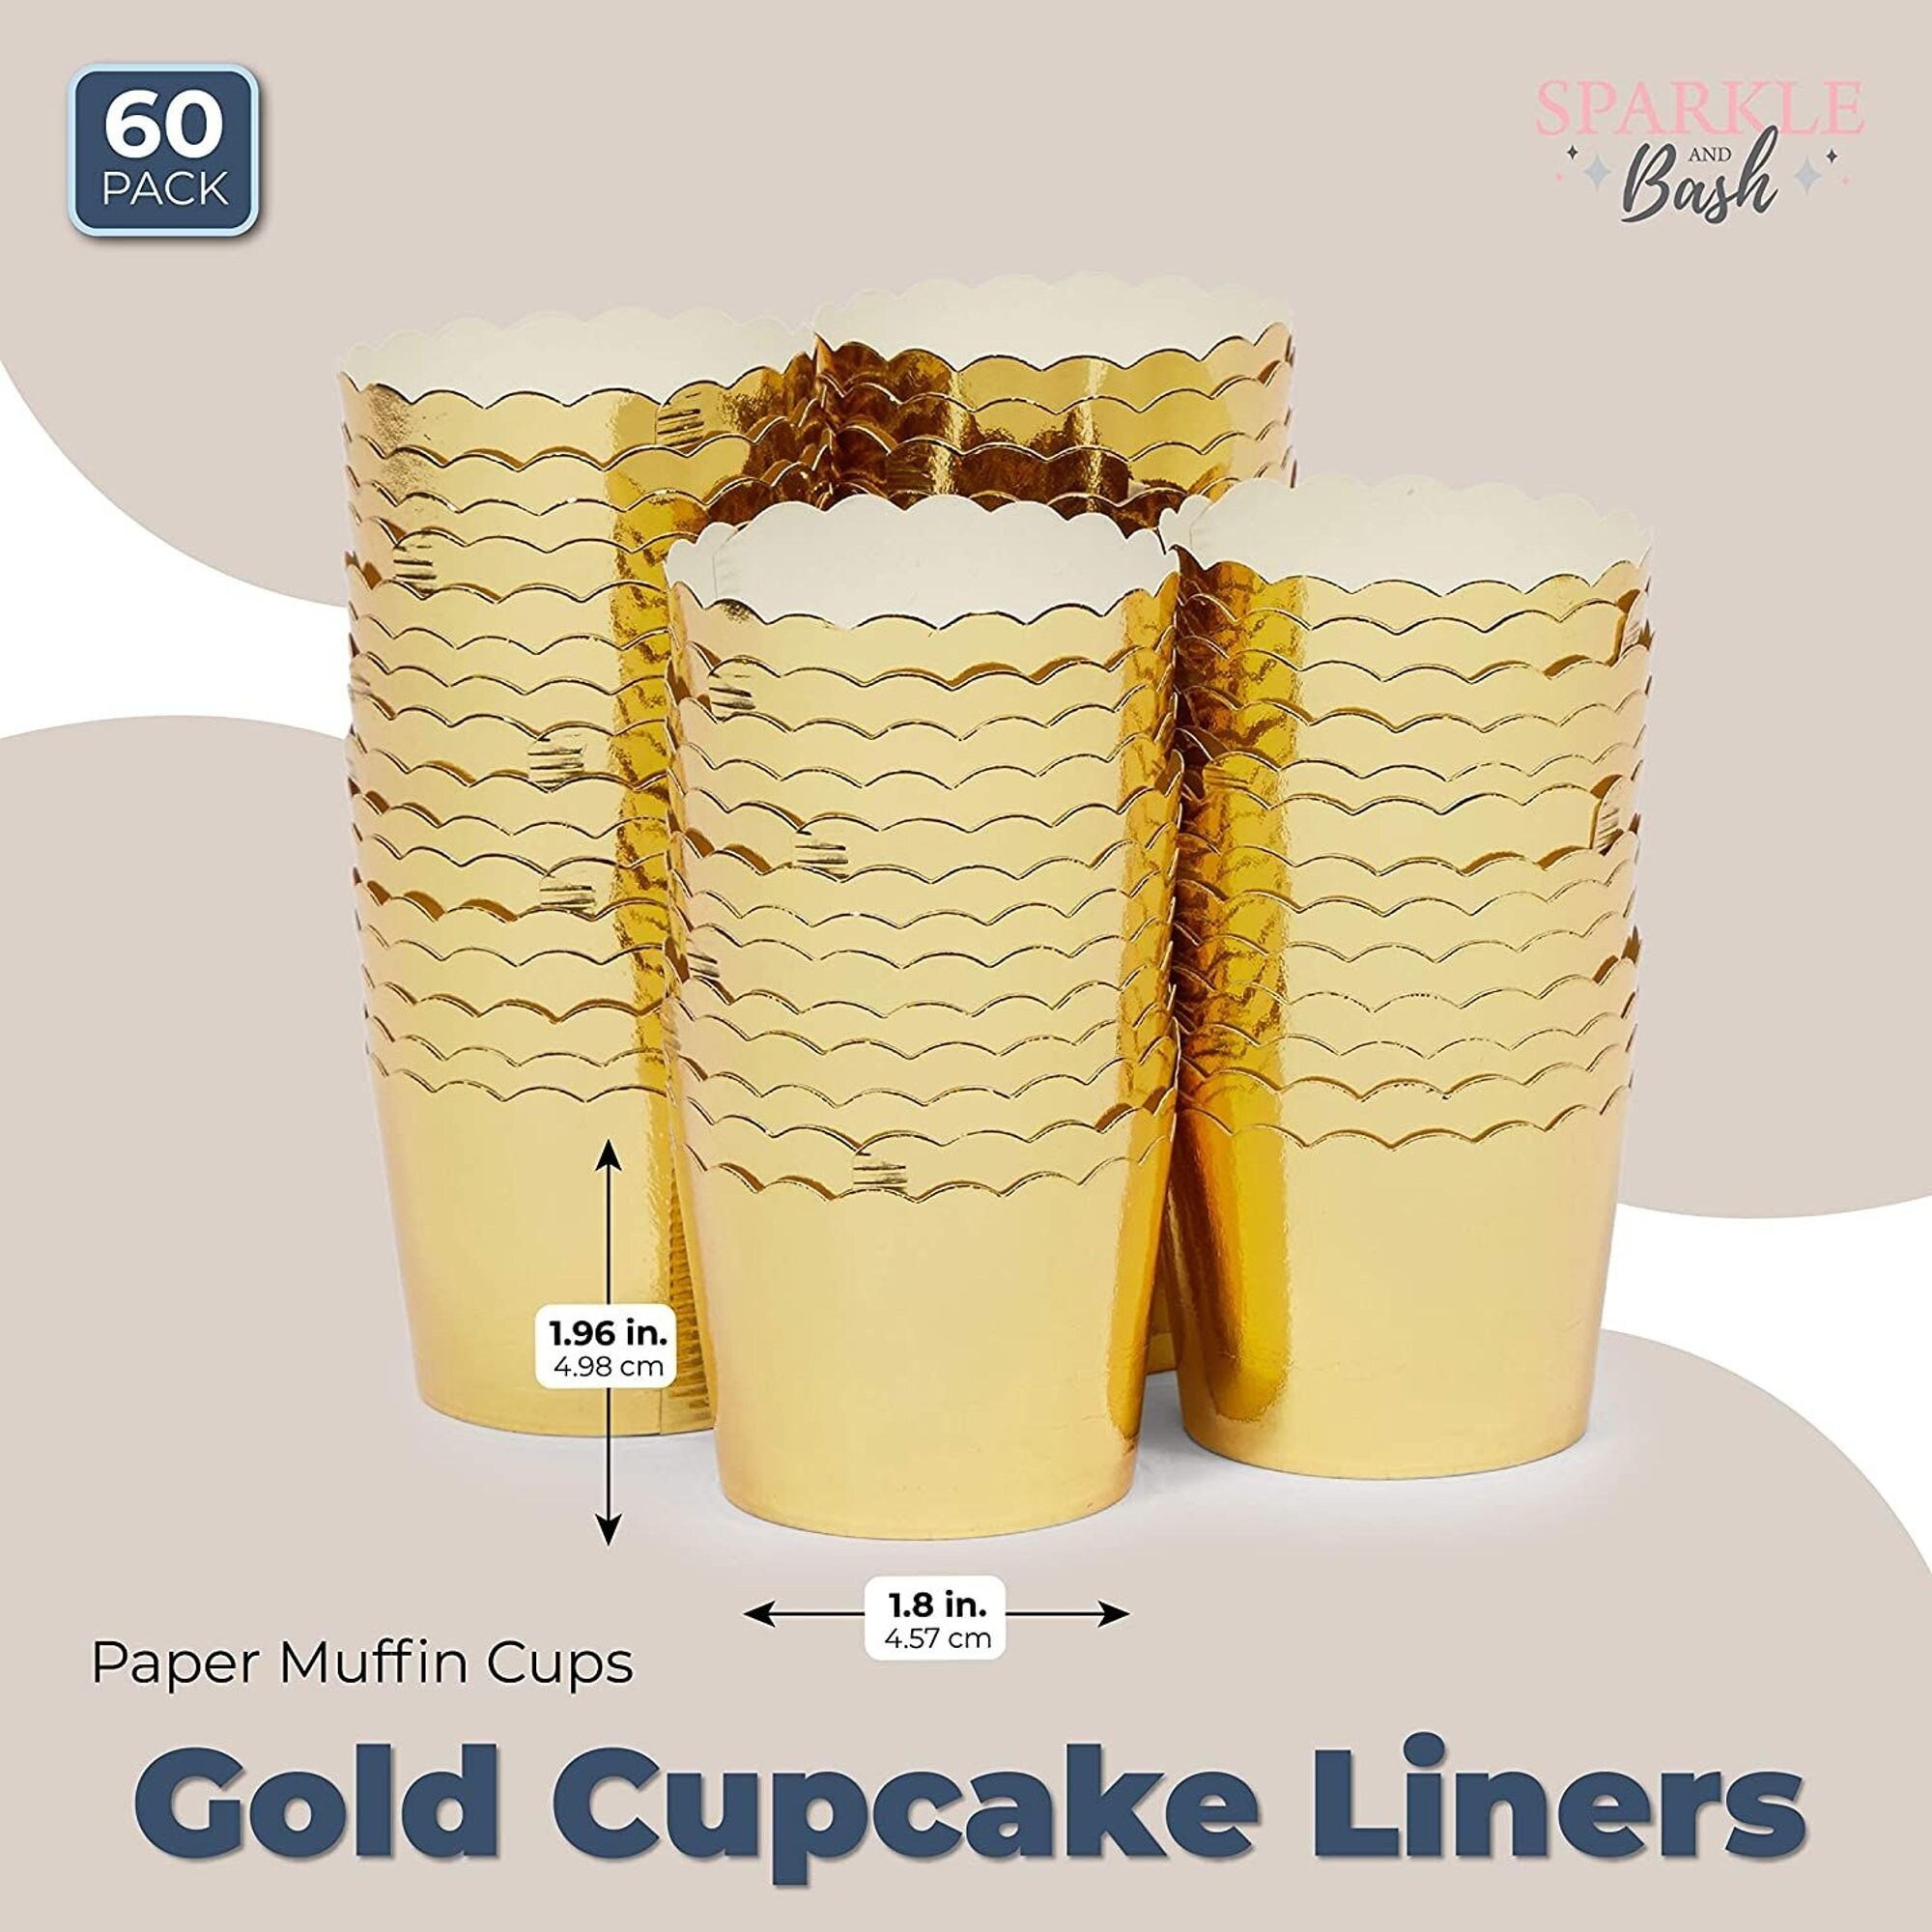 https://ak1.ostkcdn.com/images/products/is/images/direct/52c91b168fcd083ab99ee65a355140dd6358e1b4/Gold-Cupcake-Liners%2C-Paper-Muffin-Cups-%281.96-x-1.8-In%2C-60-Pack%29.jpg